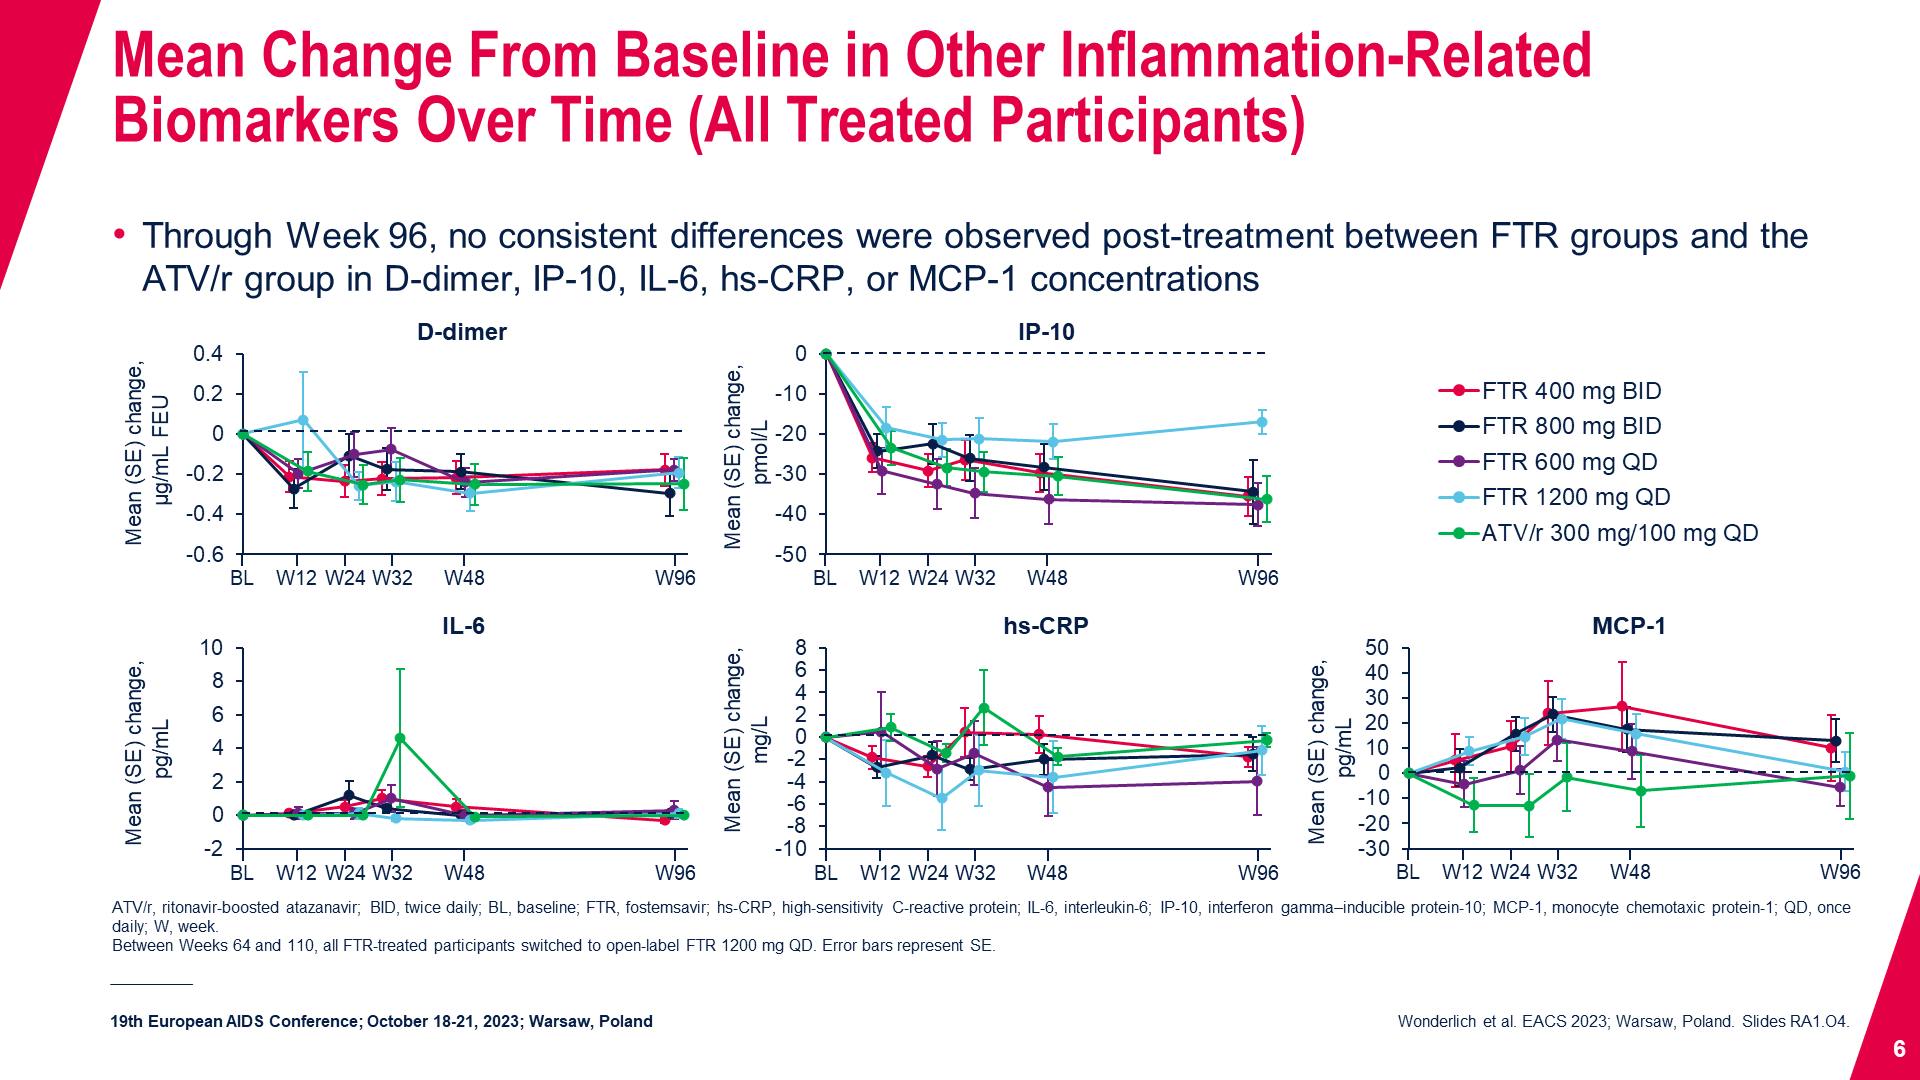 Mean Change From Baseline in Other Inflammation-Related Biomarkers Over Time